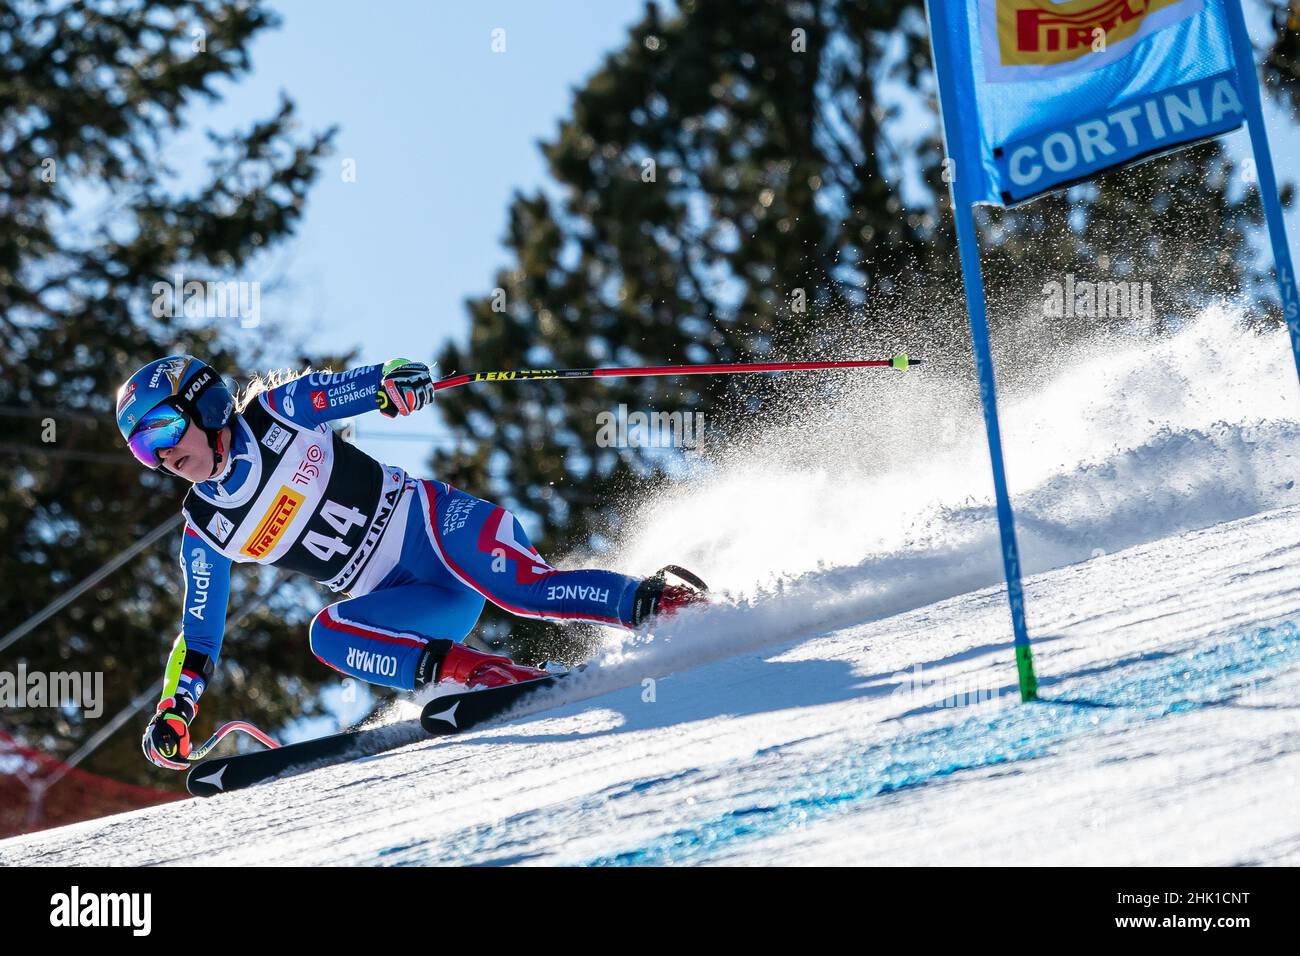 Cortina d'Ampezzo, Italy. 23 January 2022. CERUTTI Camille (FRA) competing  in the Fis Alpine Ski World Cup Women's Super-G on the Olympia delle Tofane  Stock Photo - Alamy